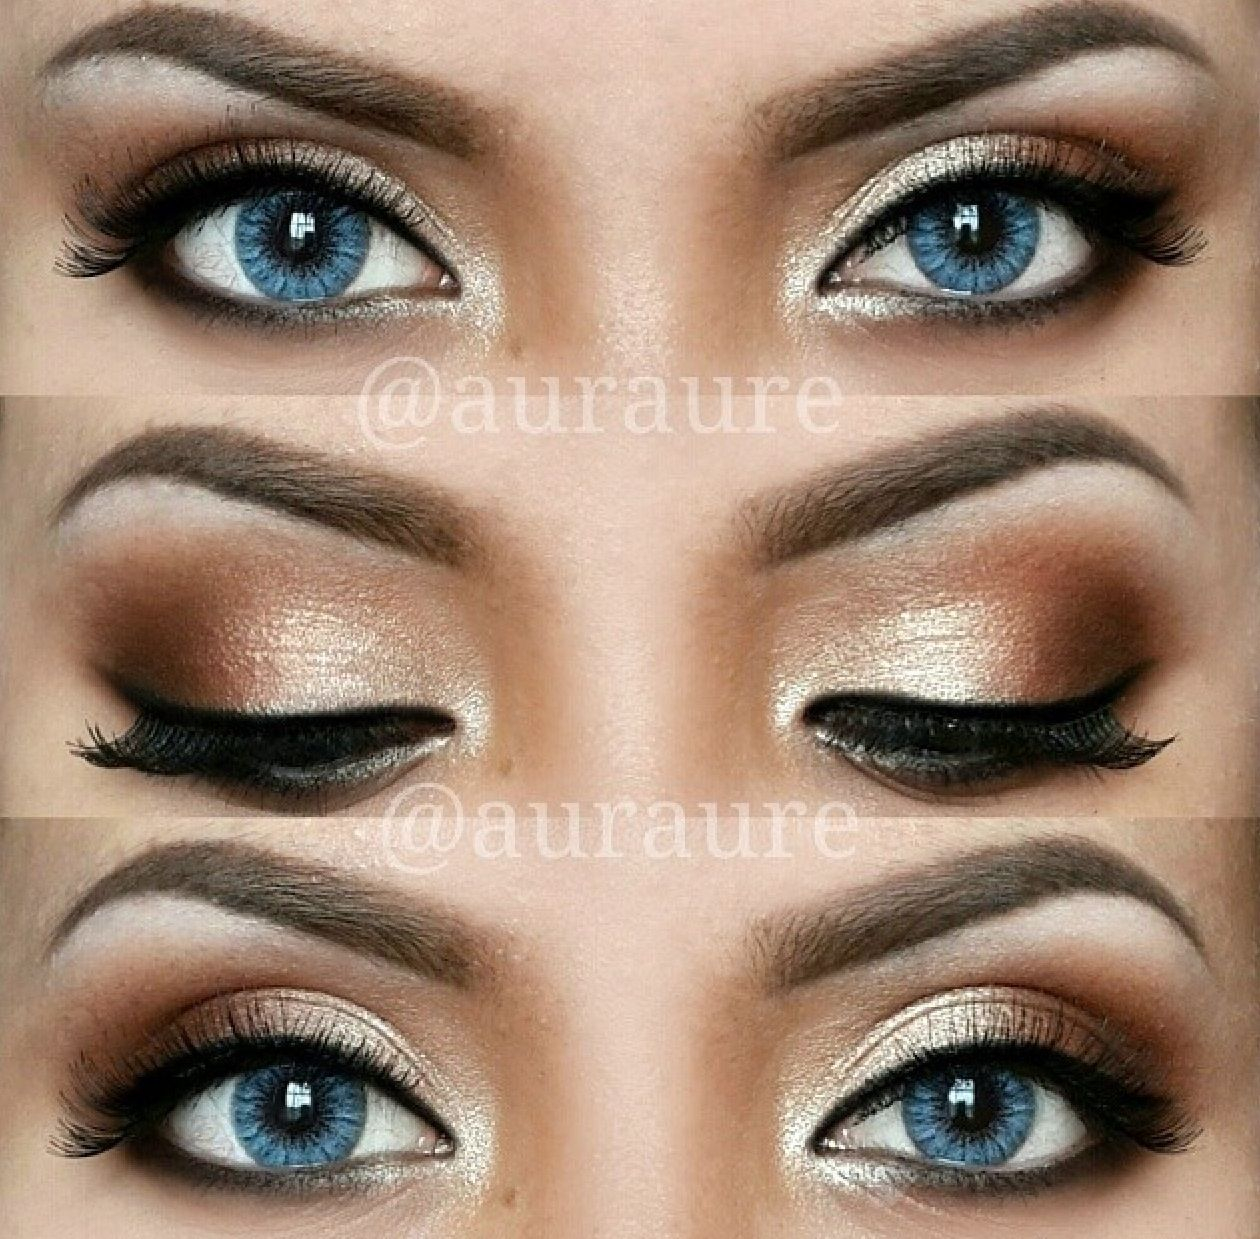 Eye Makeup For Prom 12 Easy Ideas For Prom Makeup For Blue Eyes Prom Prom Makeup